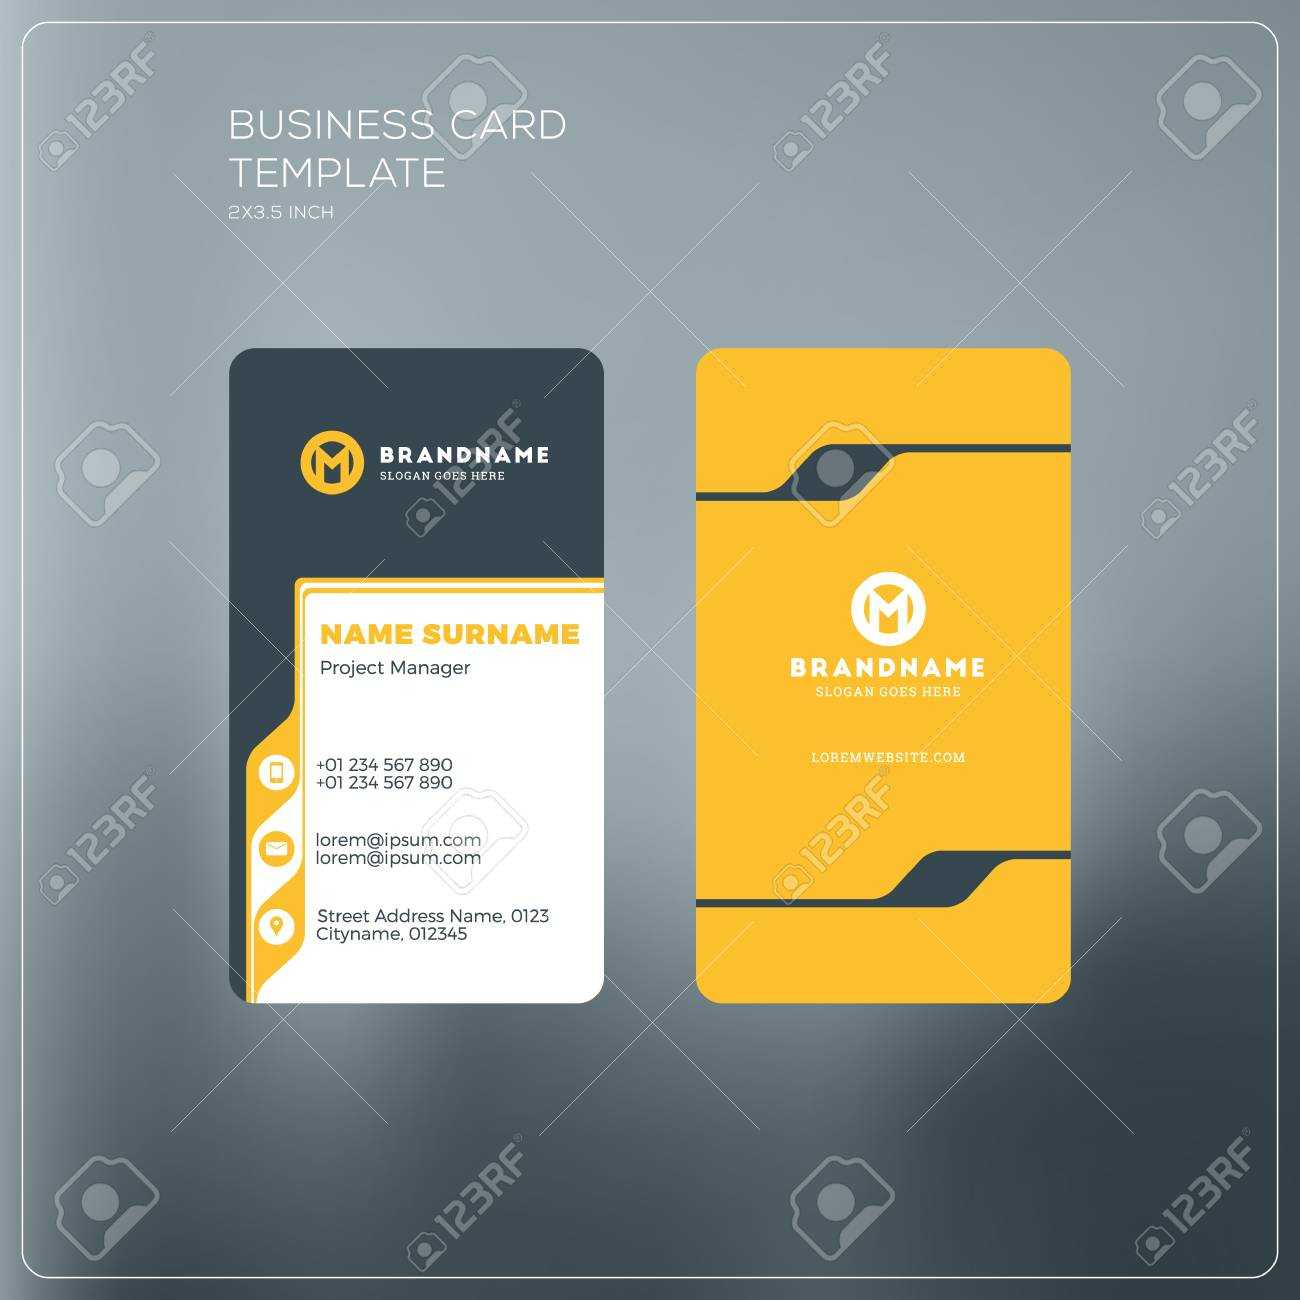 Personal Business Cards Template In Business Cards For Teachers Templates Free